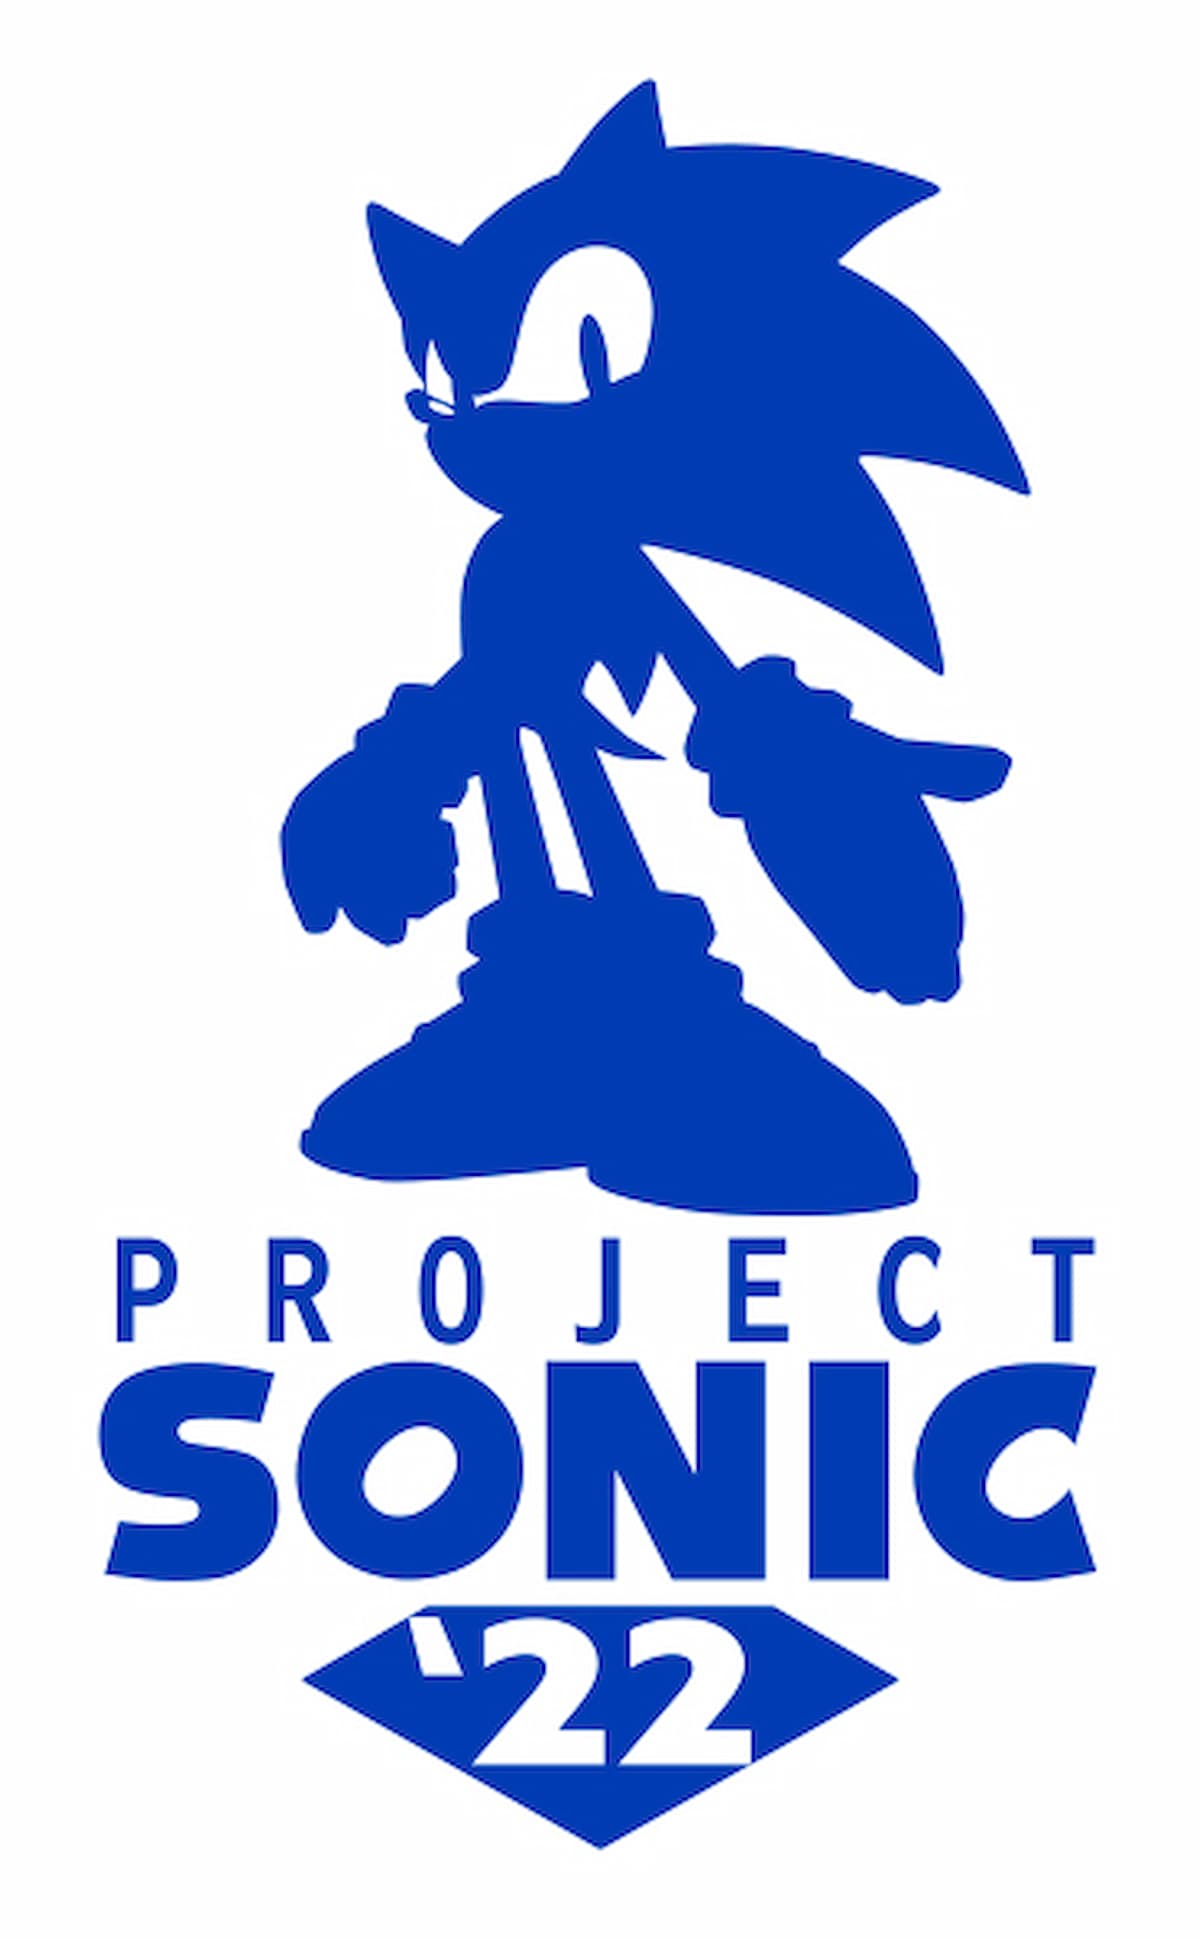 "Project Sonic ‘22"ロゴ